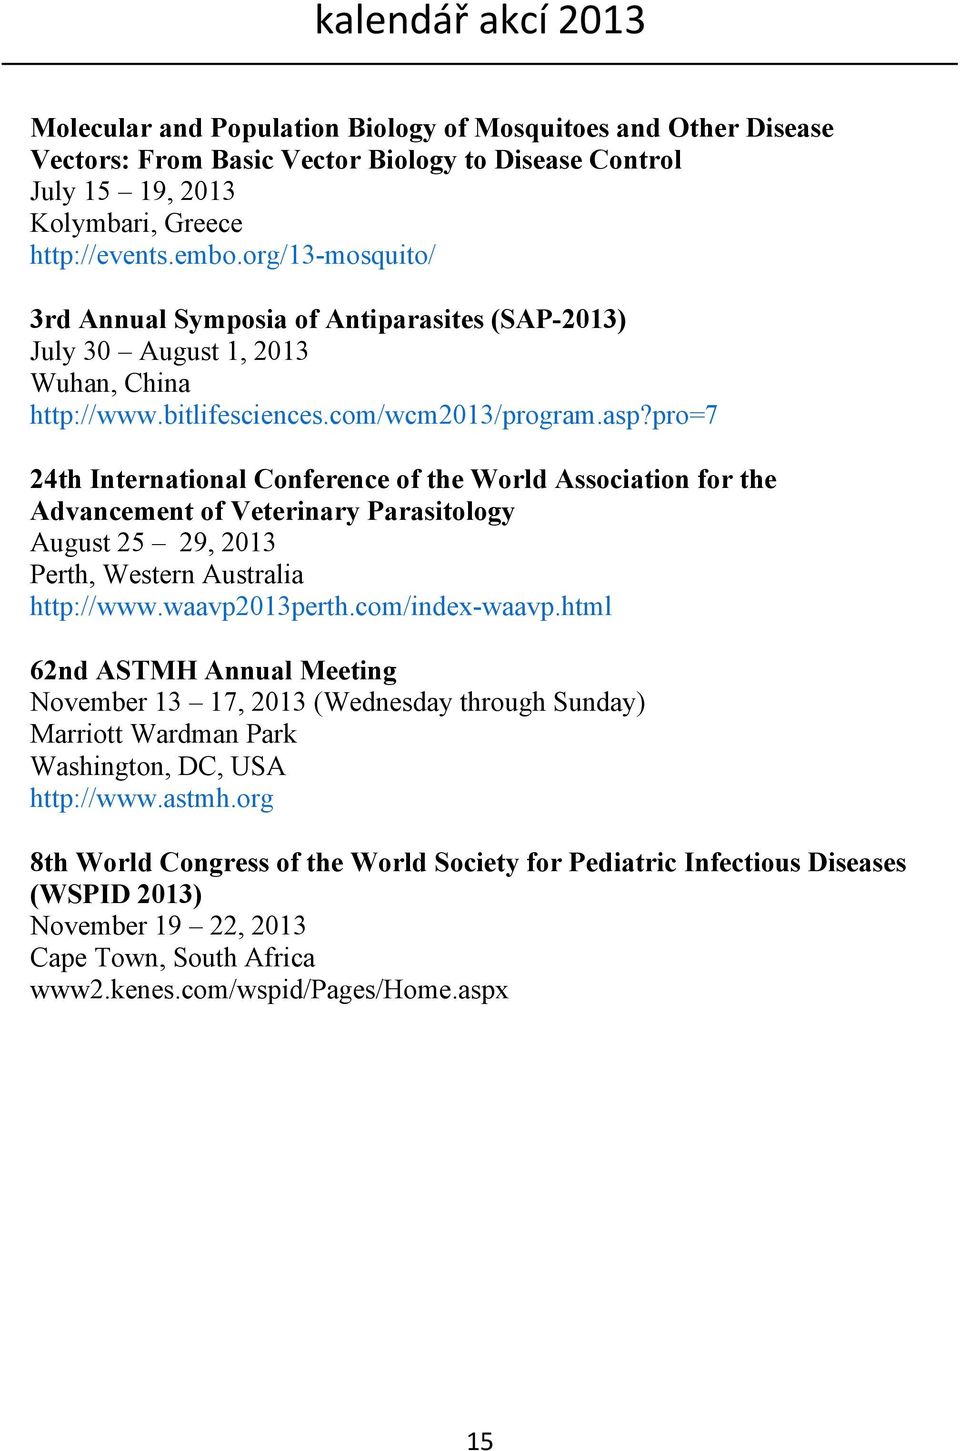 pro=7 24th International Conference of the World Association for the Advancement of Veterinary Parasitology August 25 29, 2013 Perth, Western Australia http://www.waavp2013perth.com/index-waavp.